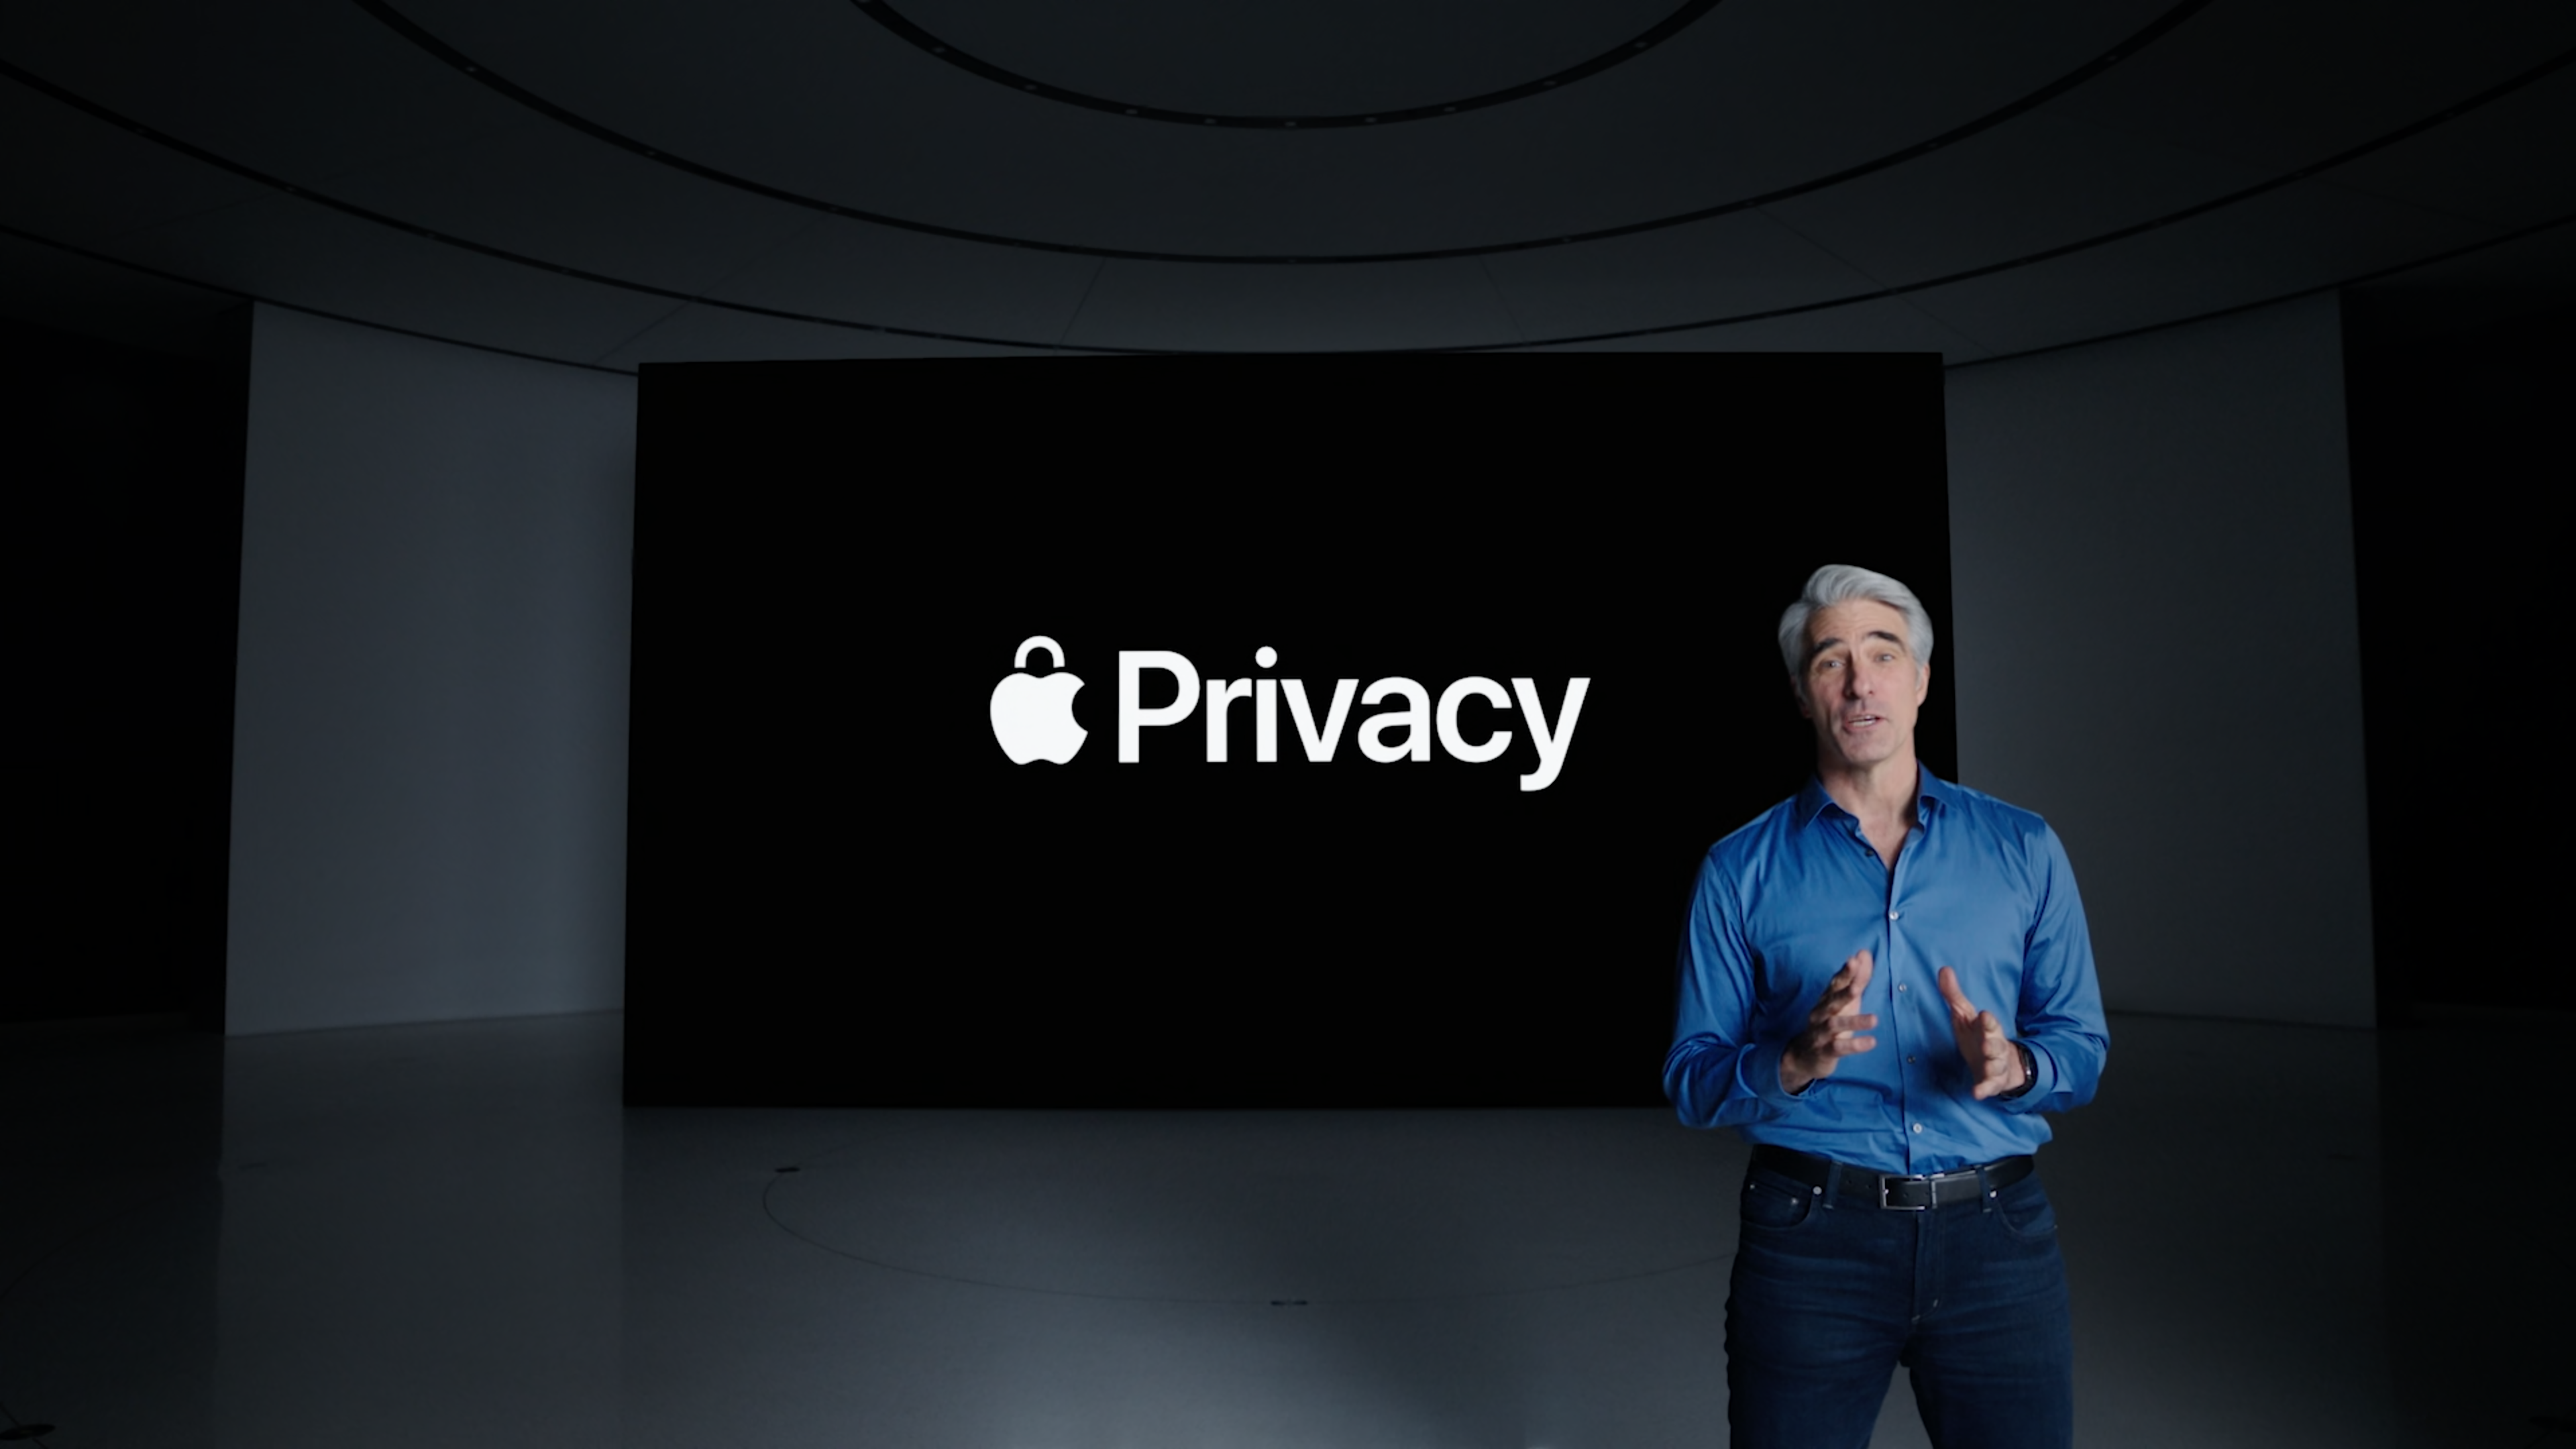 Apple-WWDC-Privacy-IOS15-Craig-Counterpoint-Research.png